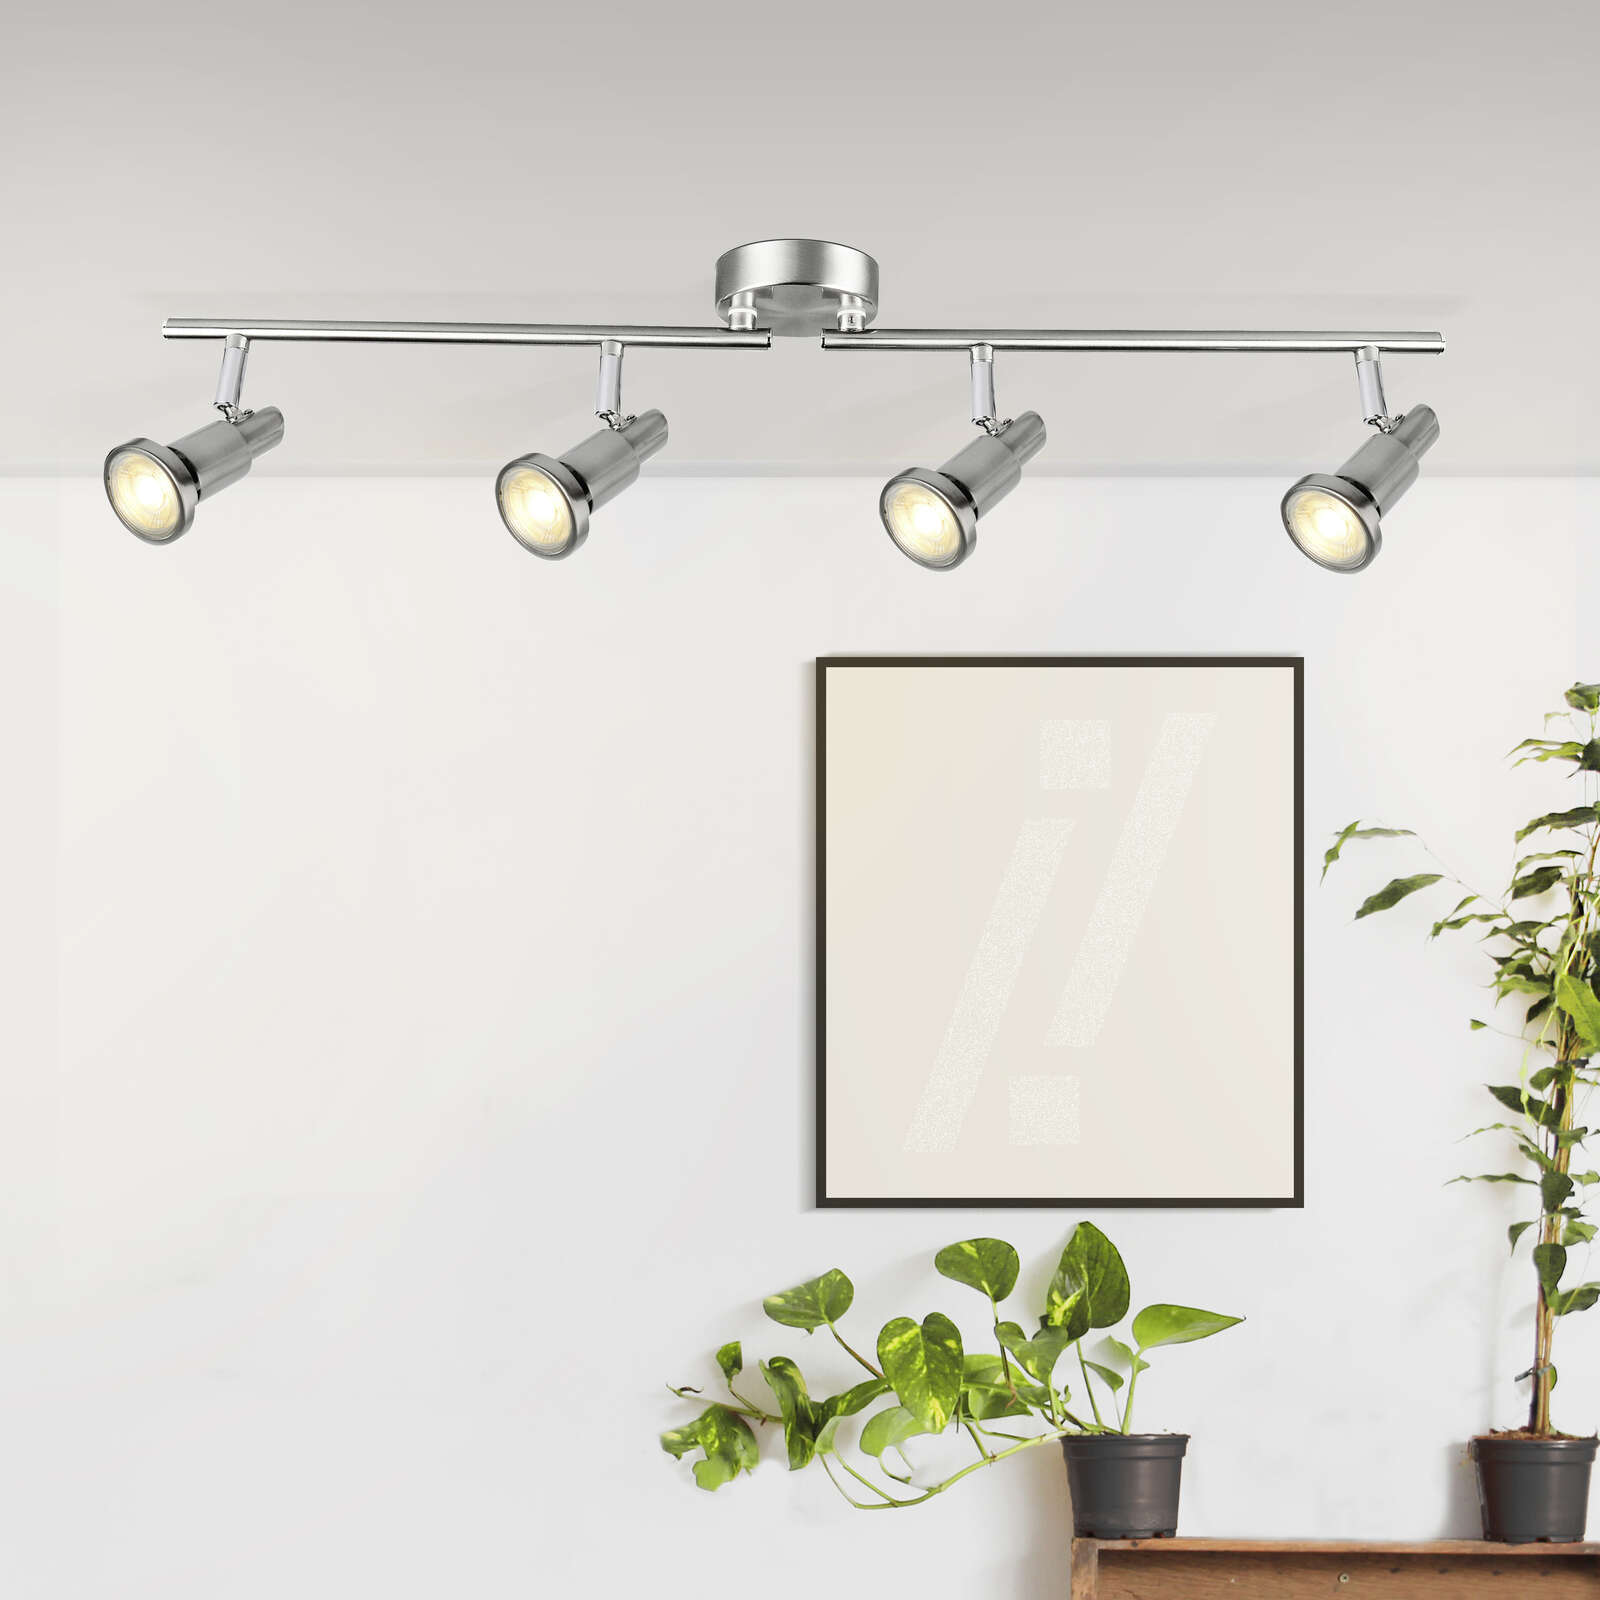             Metal ceiling light - Mika - Silver
        